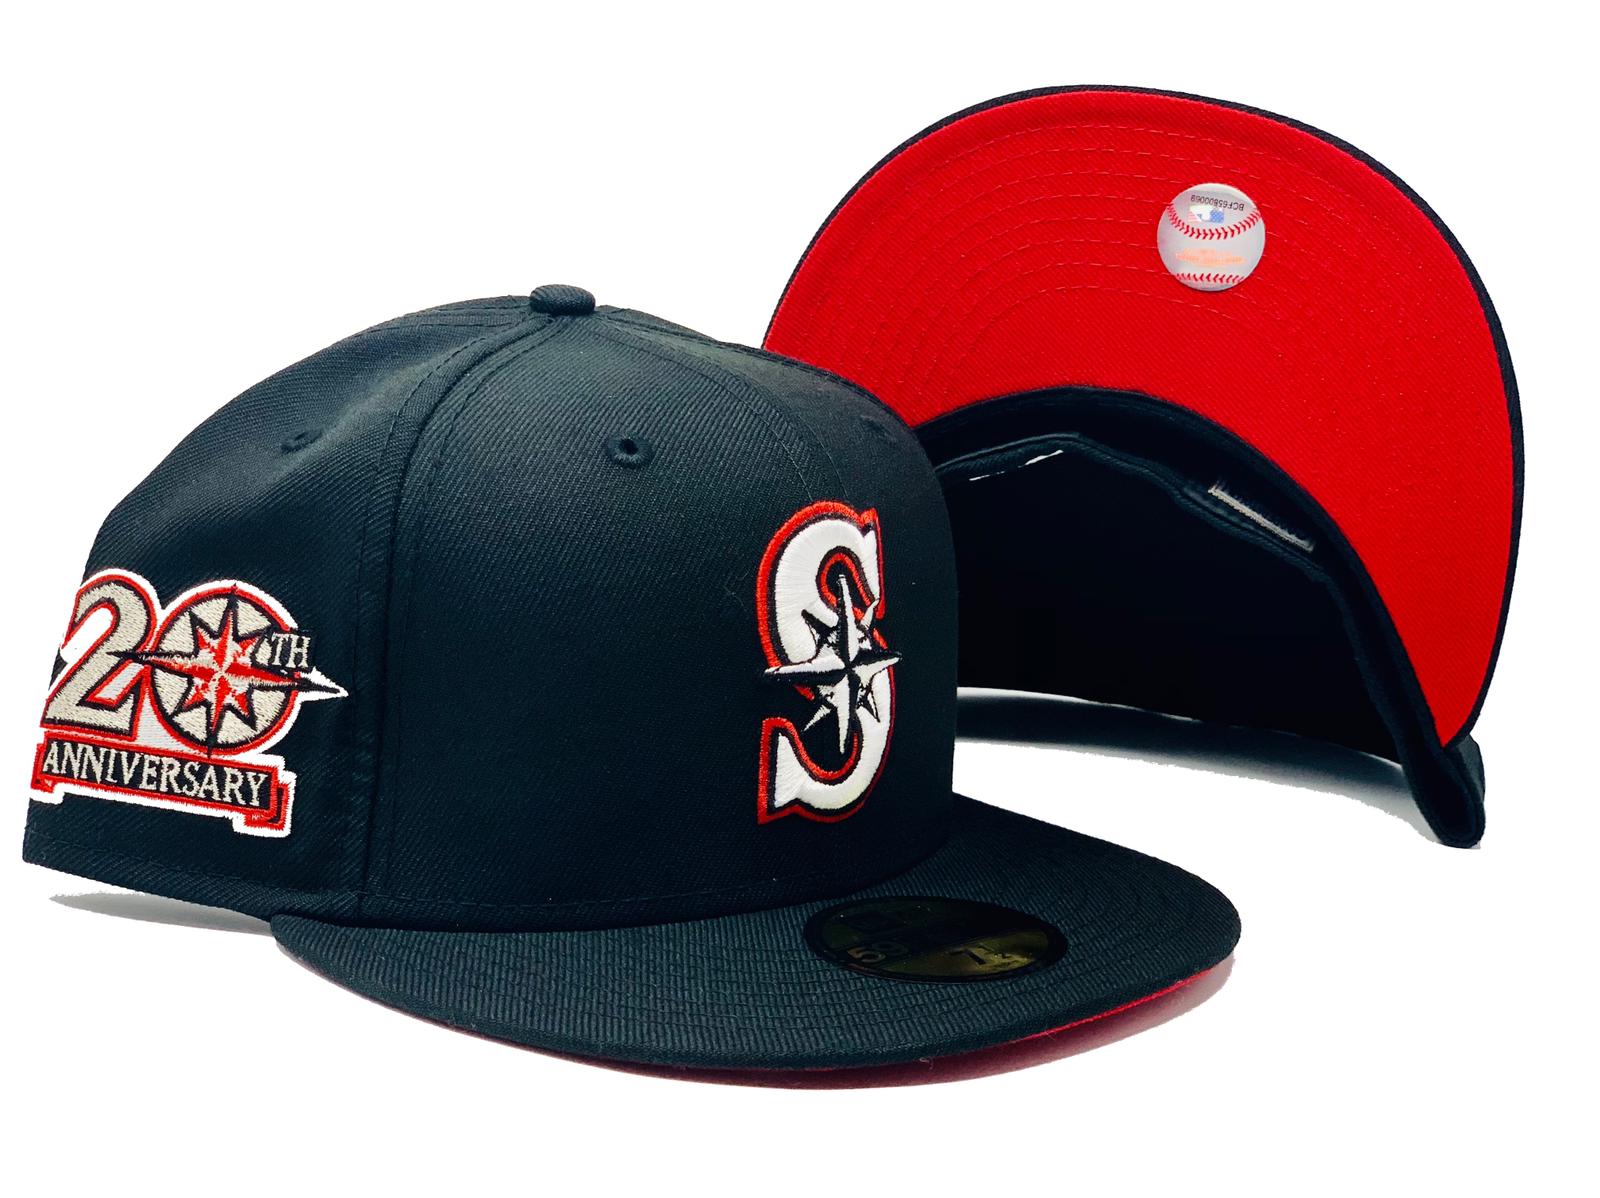 SEATTLE MARINERS 20TH ANNIVERSARY BLACK RED BRIM NEW ERA FITTED